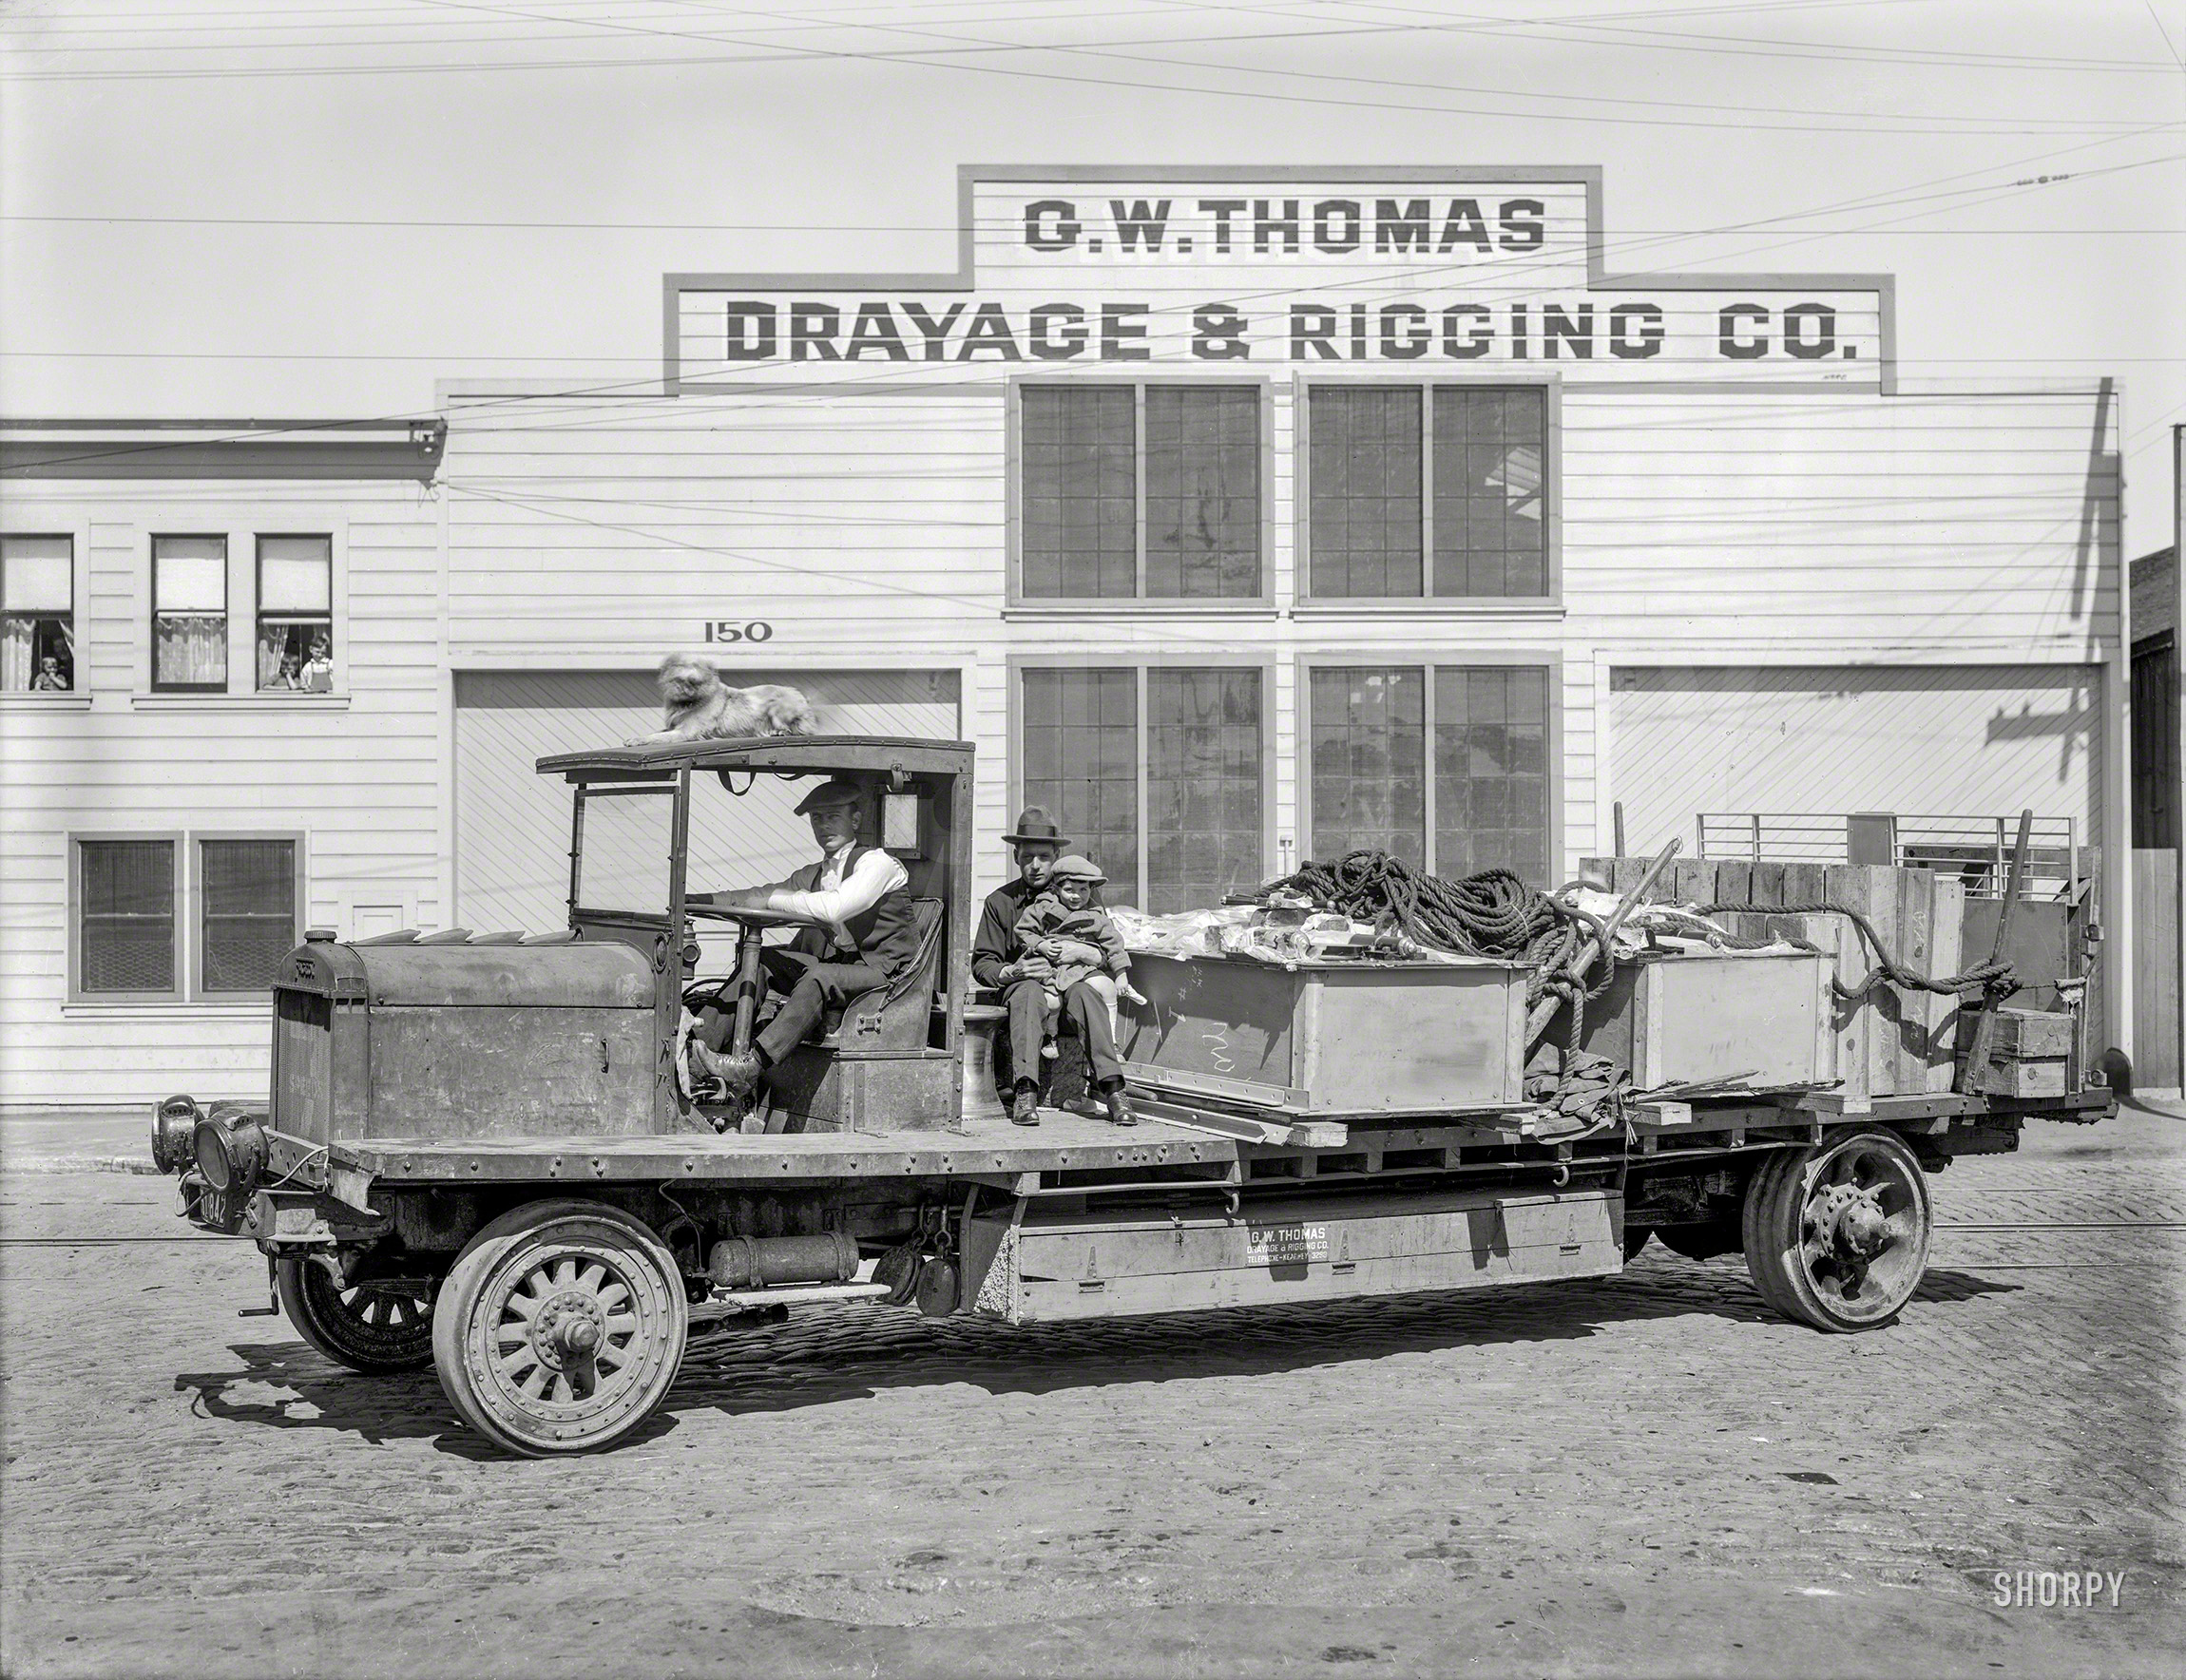 San Francisco circa 1923. "Fageol motor truck -- G.W. Thomas Drayage & Rigging." And their little dog, too, along with a liberal sprinkling of totlets. 6½ x 8½ glass negative, originally from the Wyland Stanley collection. View full size.